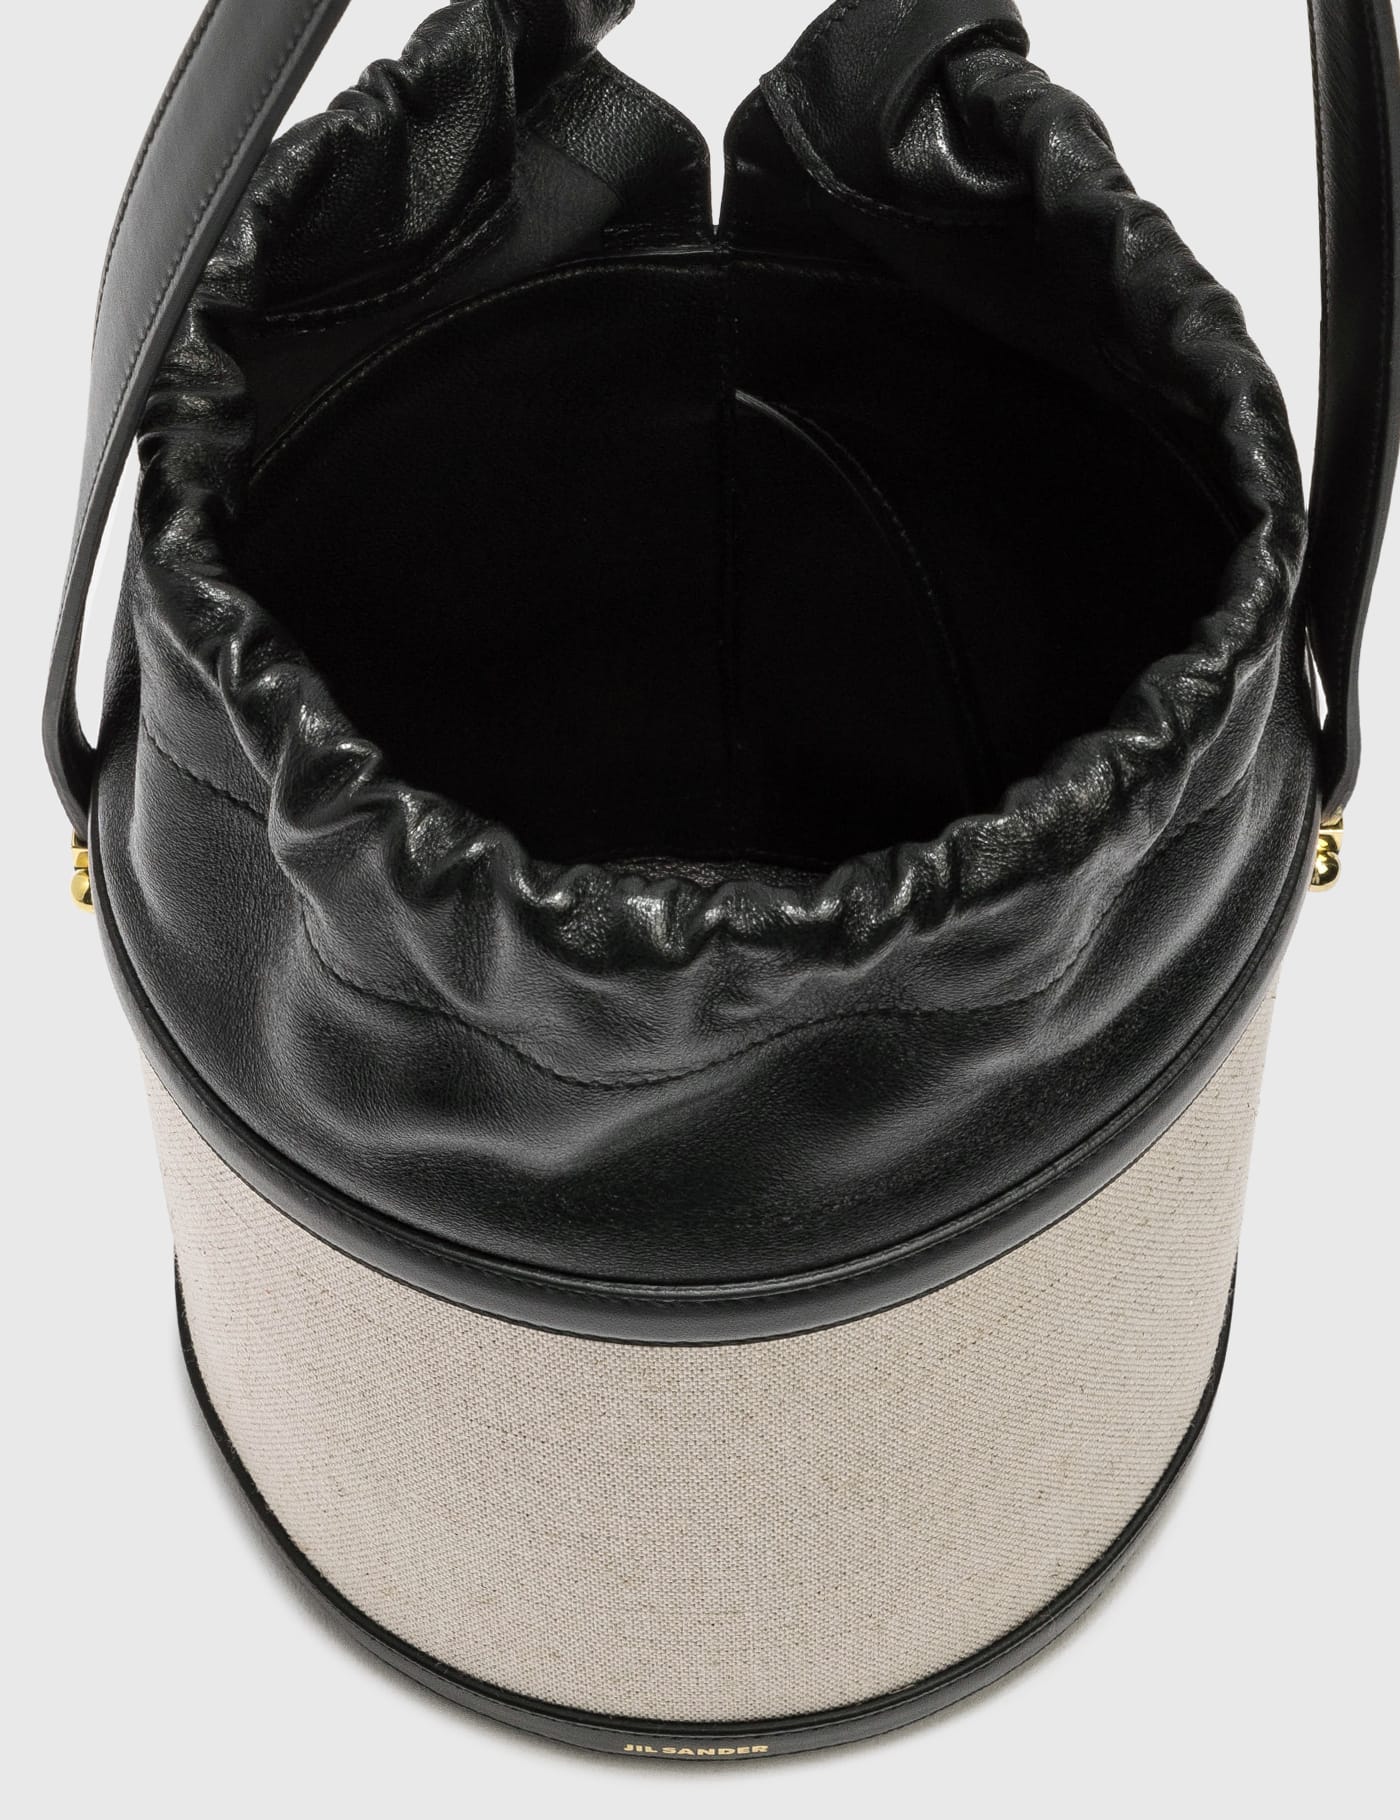 Jil Sander - Taos Bucket Bag | HBX - Globally Curated Fashion and Lifestyle  by Hypebeast